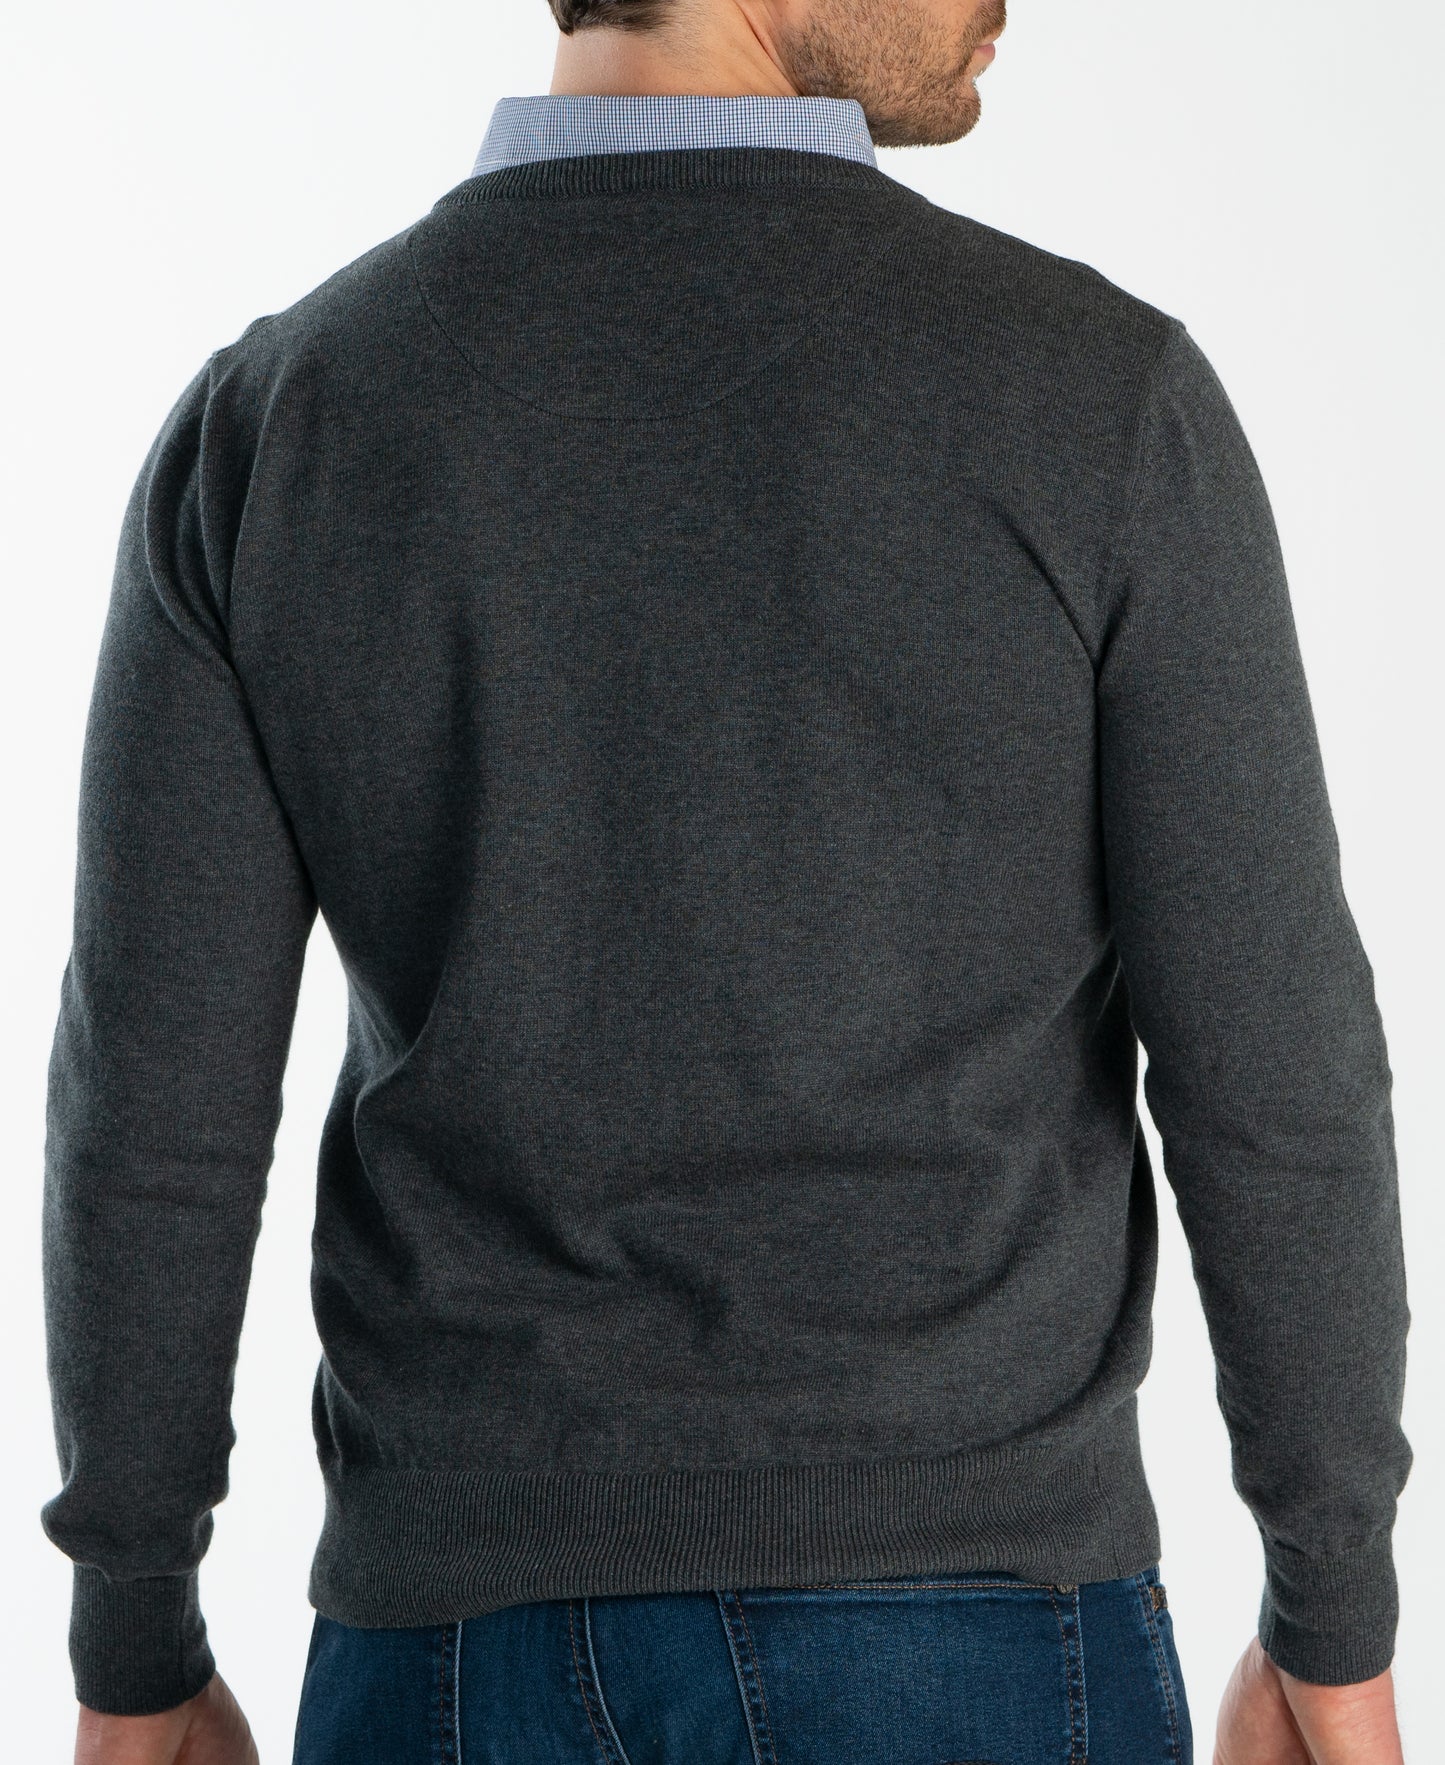 Flying Point Apparel 2-in-1 sweater shirt combo